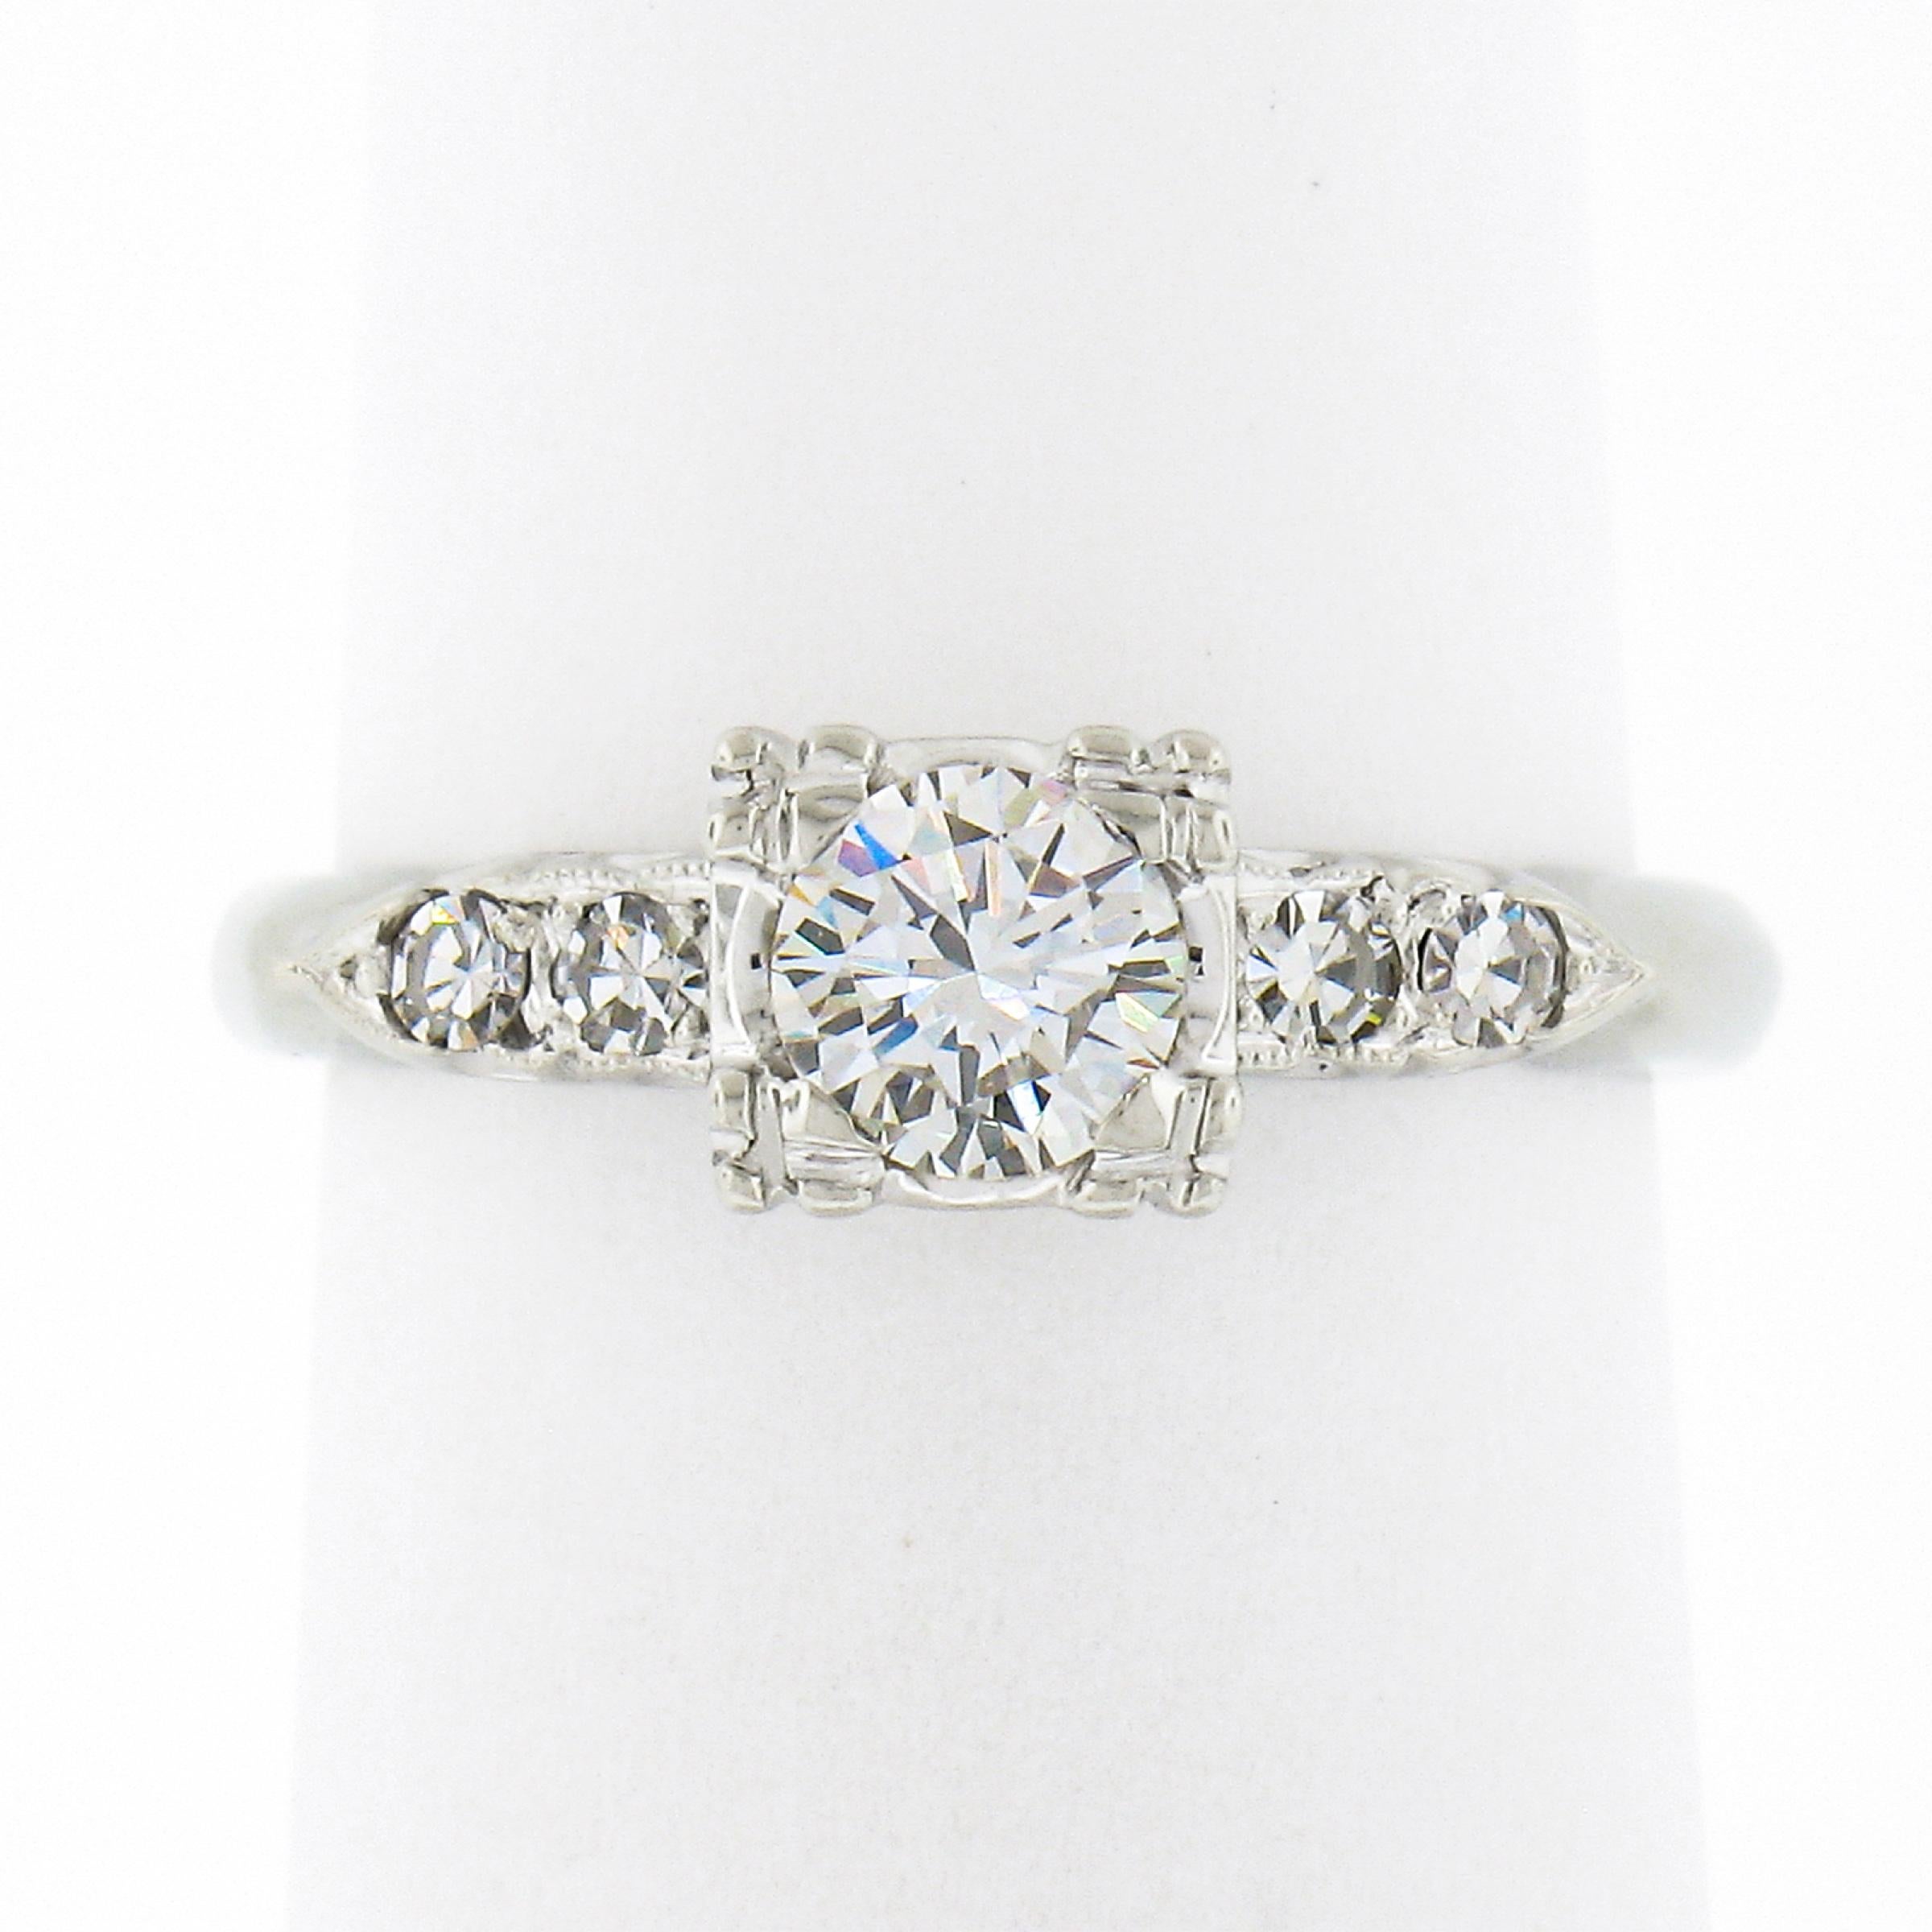 This gorgeous, all original, midcentury diamond ring was very well crafted in solid 14k white gold. It features a stunning round brilliant cut diamond neatly set at the center of the ring in a square-shaped open basket setting. The solitaire weighs